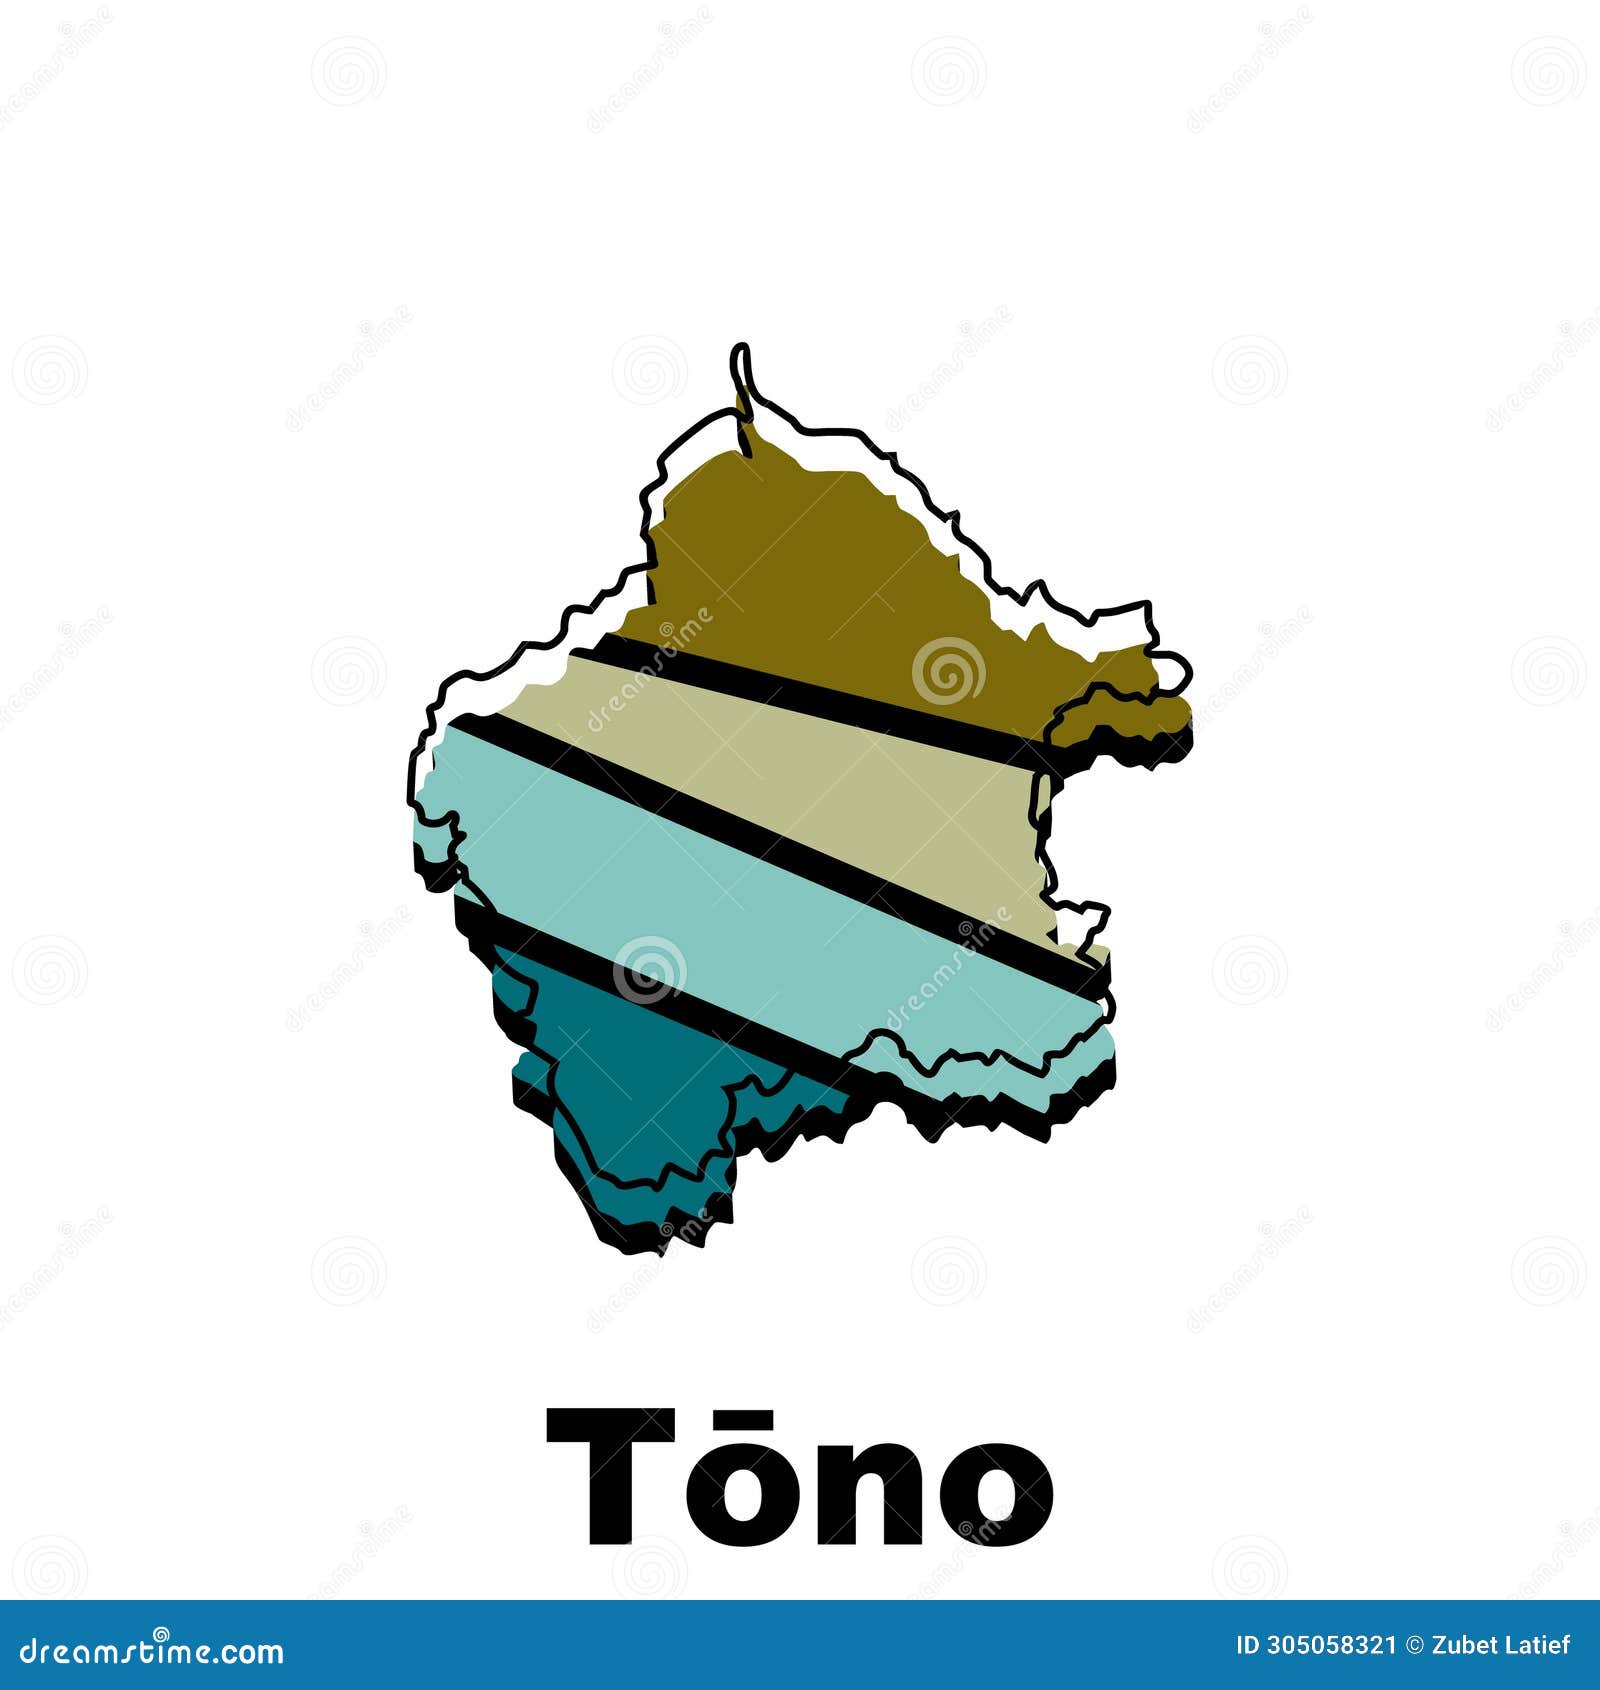 map of tono city - japan map and infographic of provinces, political maps of japan, region of japan for your company